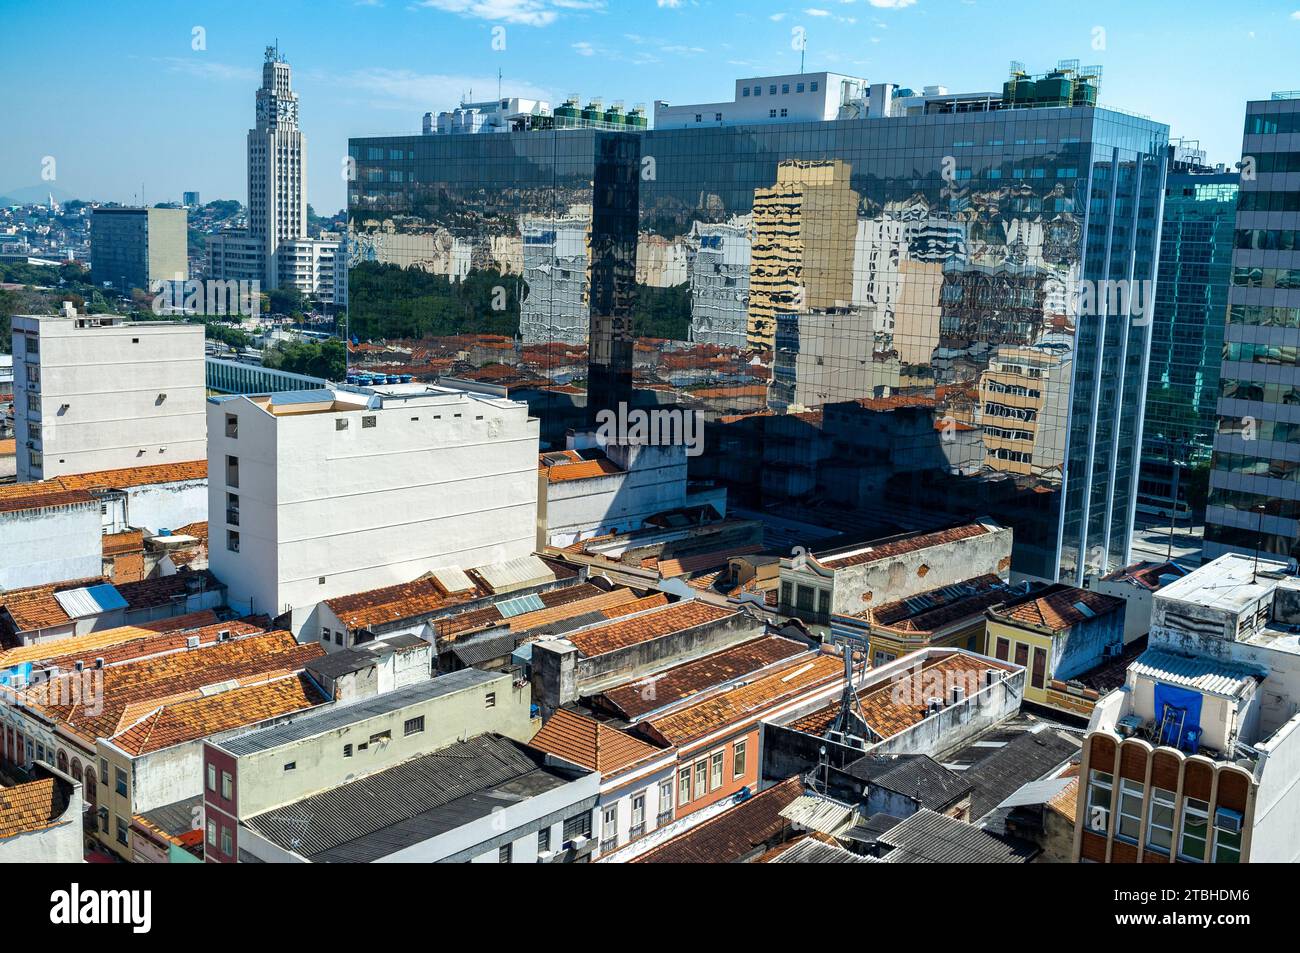 Urban contrast - preserved sobrados, two or more story ancient houses from the colonial and imperial periods in Brazil at the heart of the popular commerce region known as Saara in downtown Rio de Janeiro, next to corporate modern buildings. Central do Brasil train station building in background left. Stock Photo